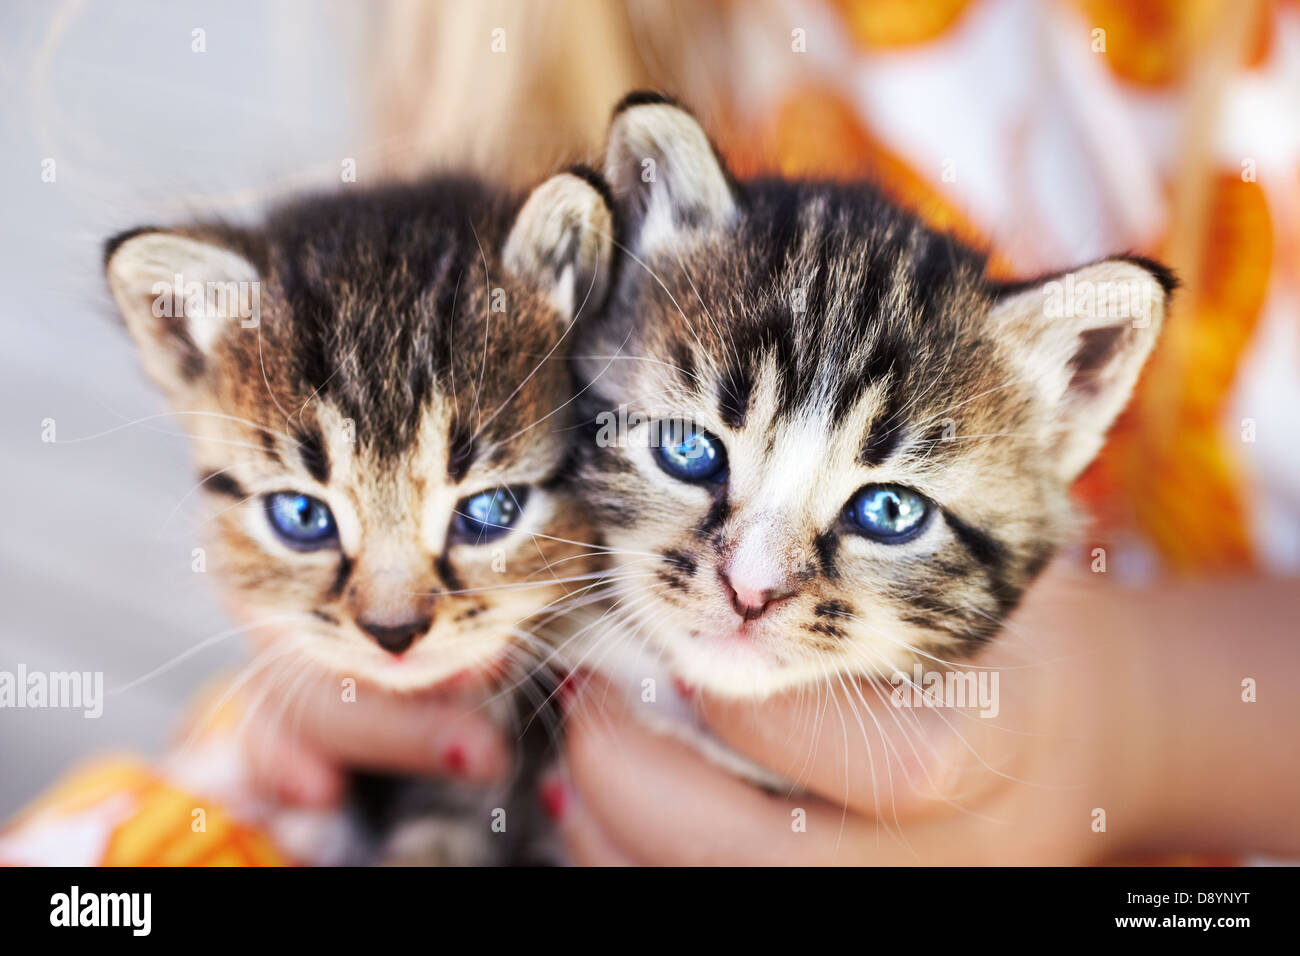 Two kittens held by person Stock Photo